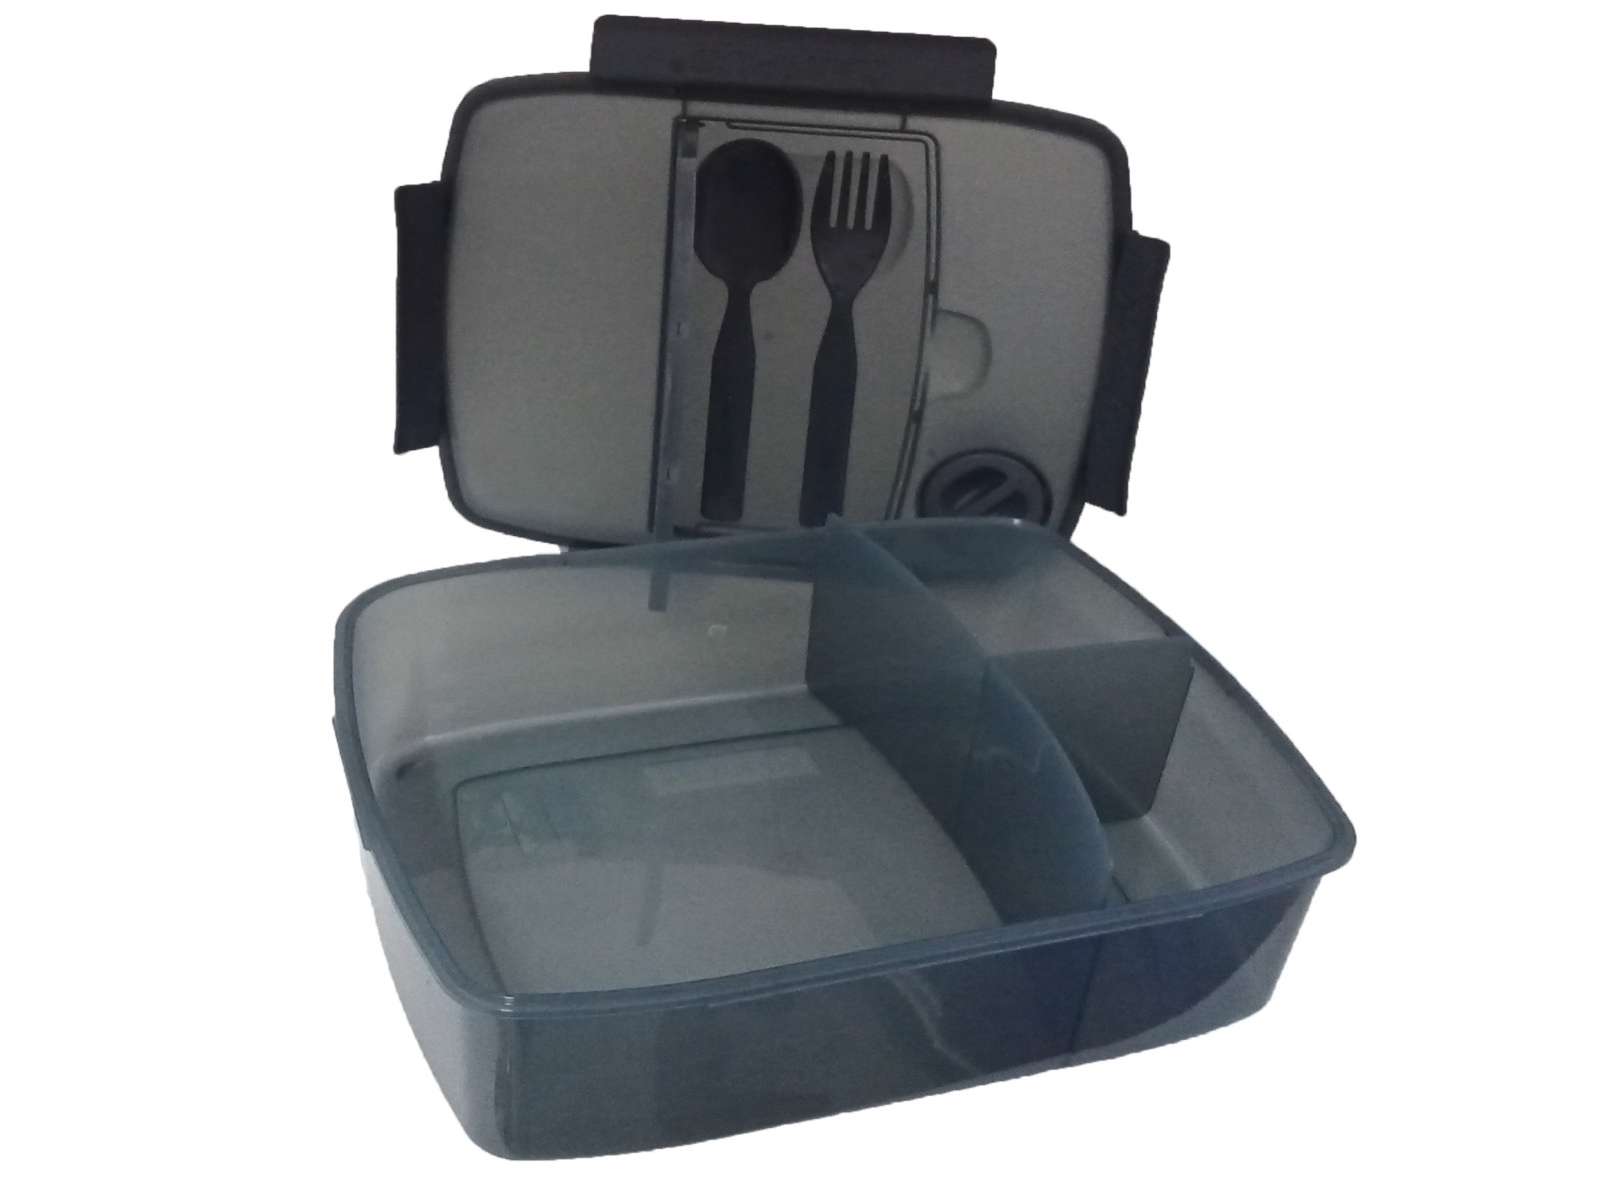 Lunch box (utensil & sauce pot included)